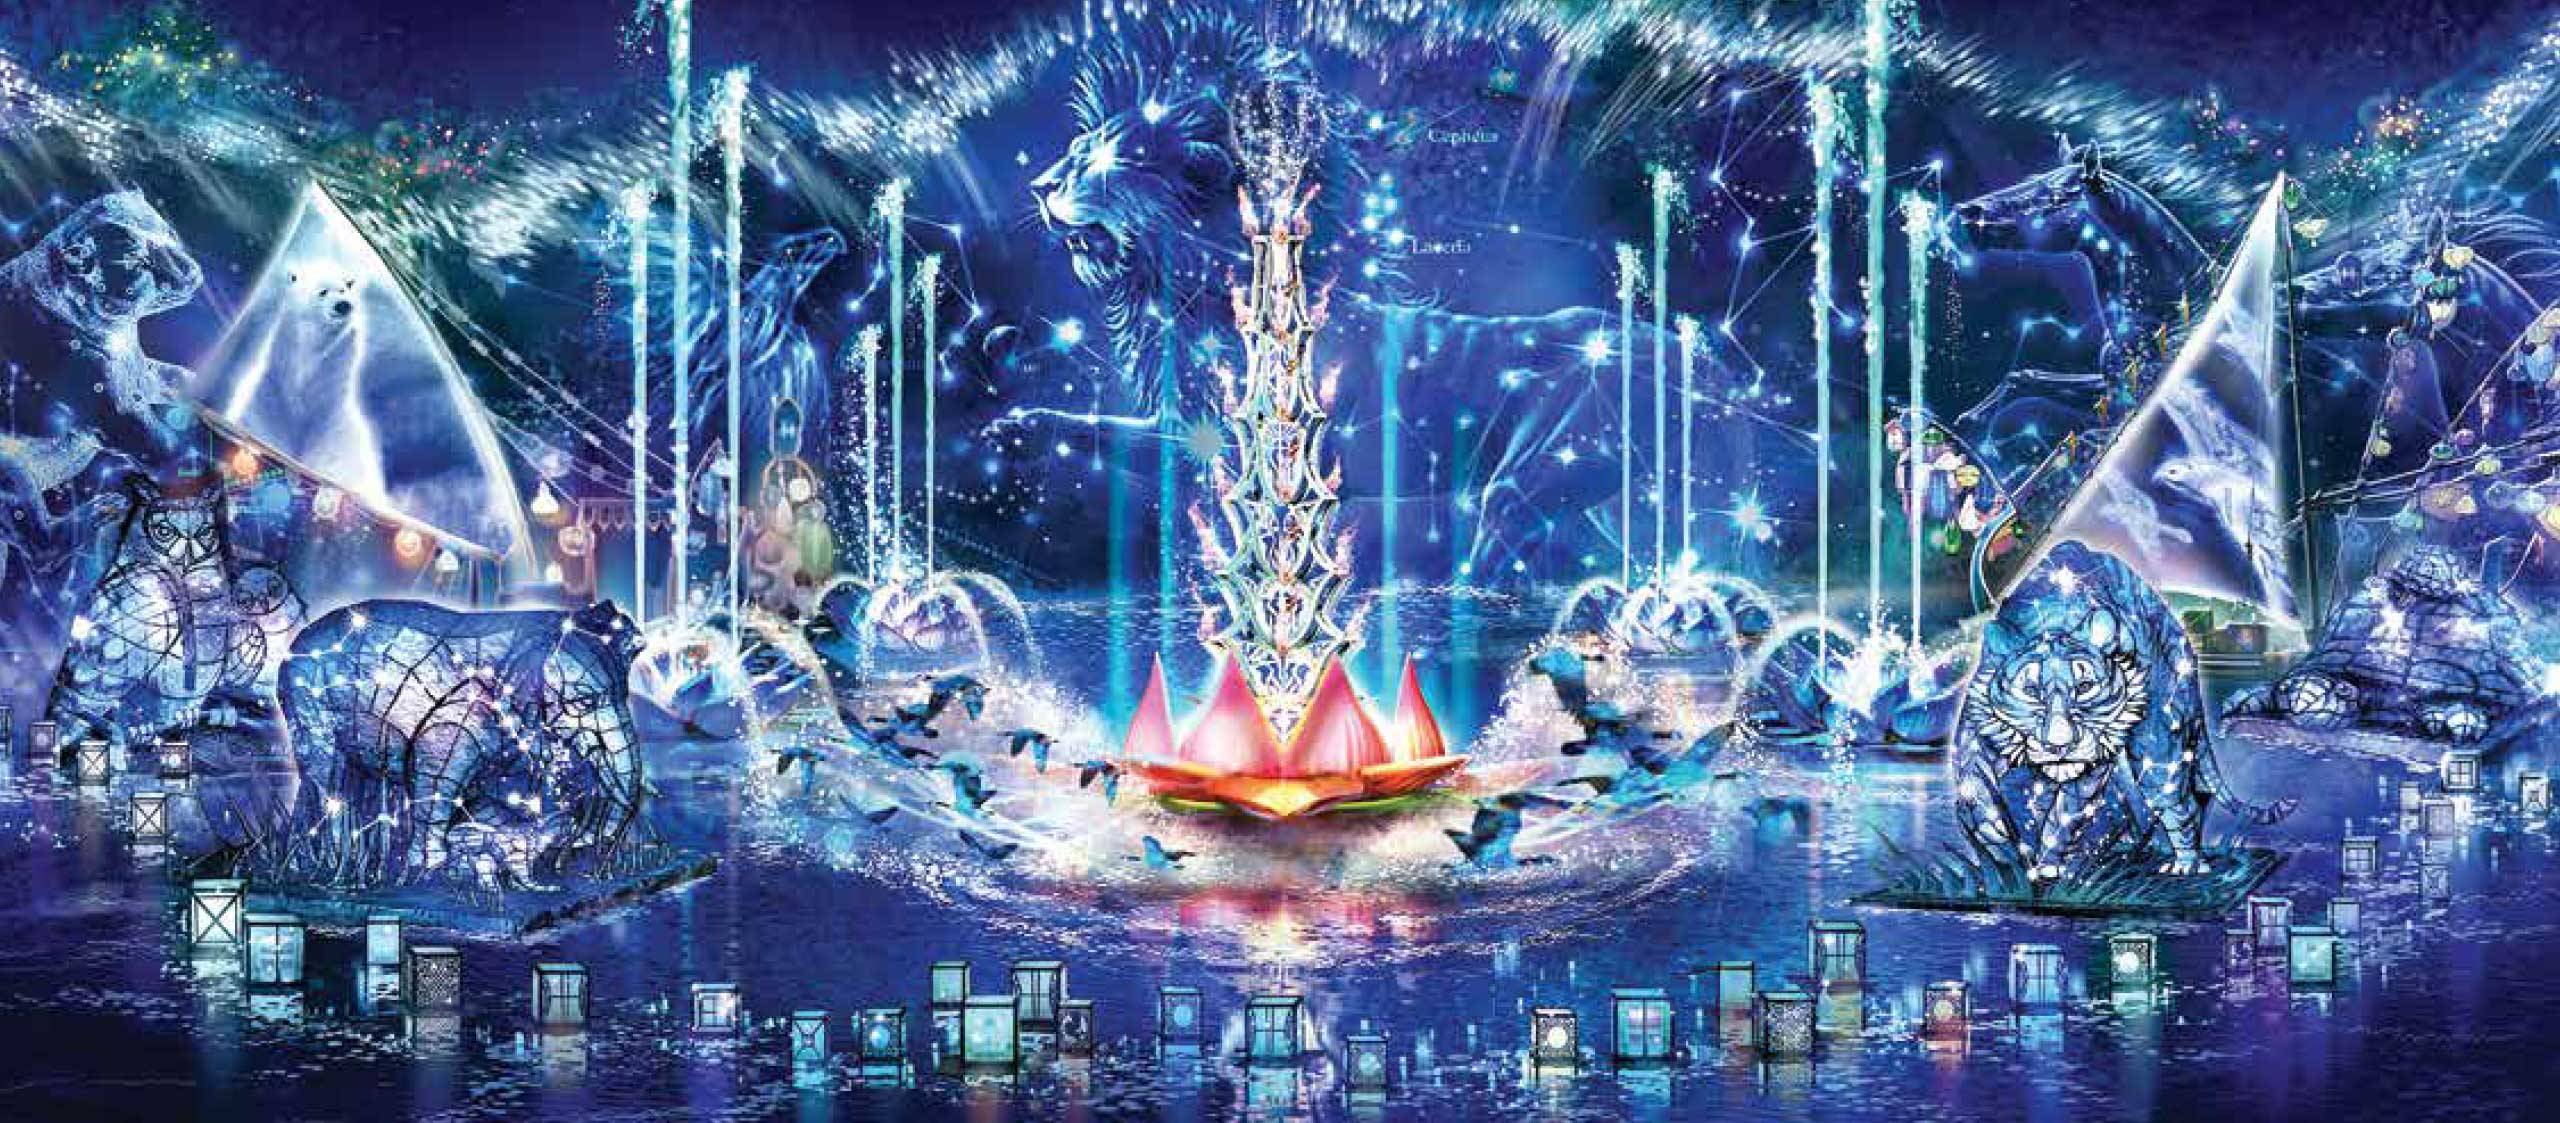 New Rivers of Light concept art shown in latest Passholder Mickey Monitor